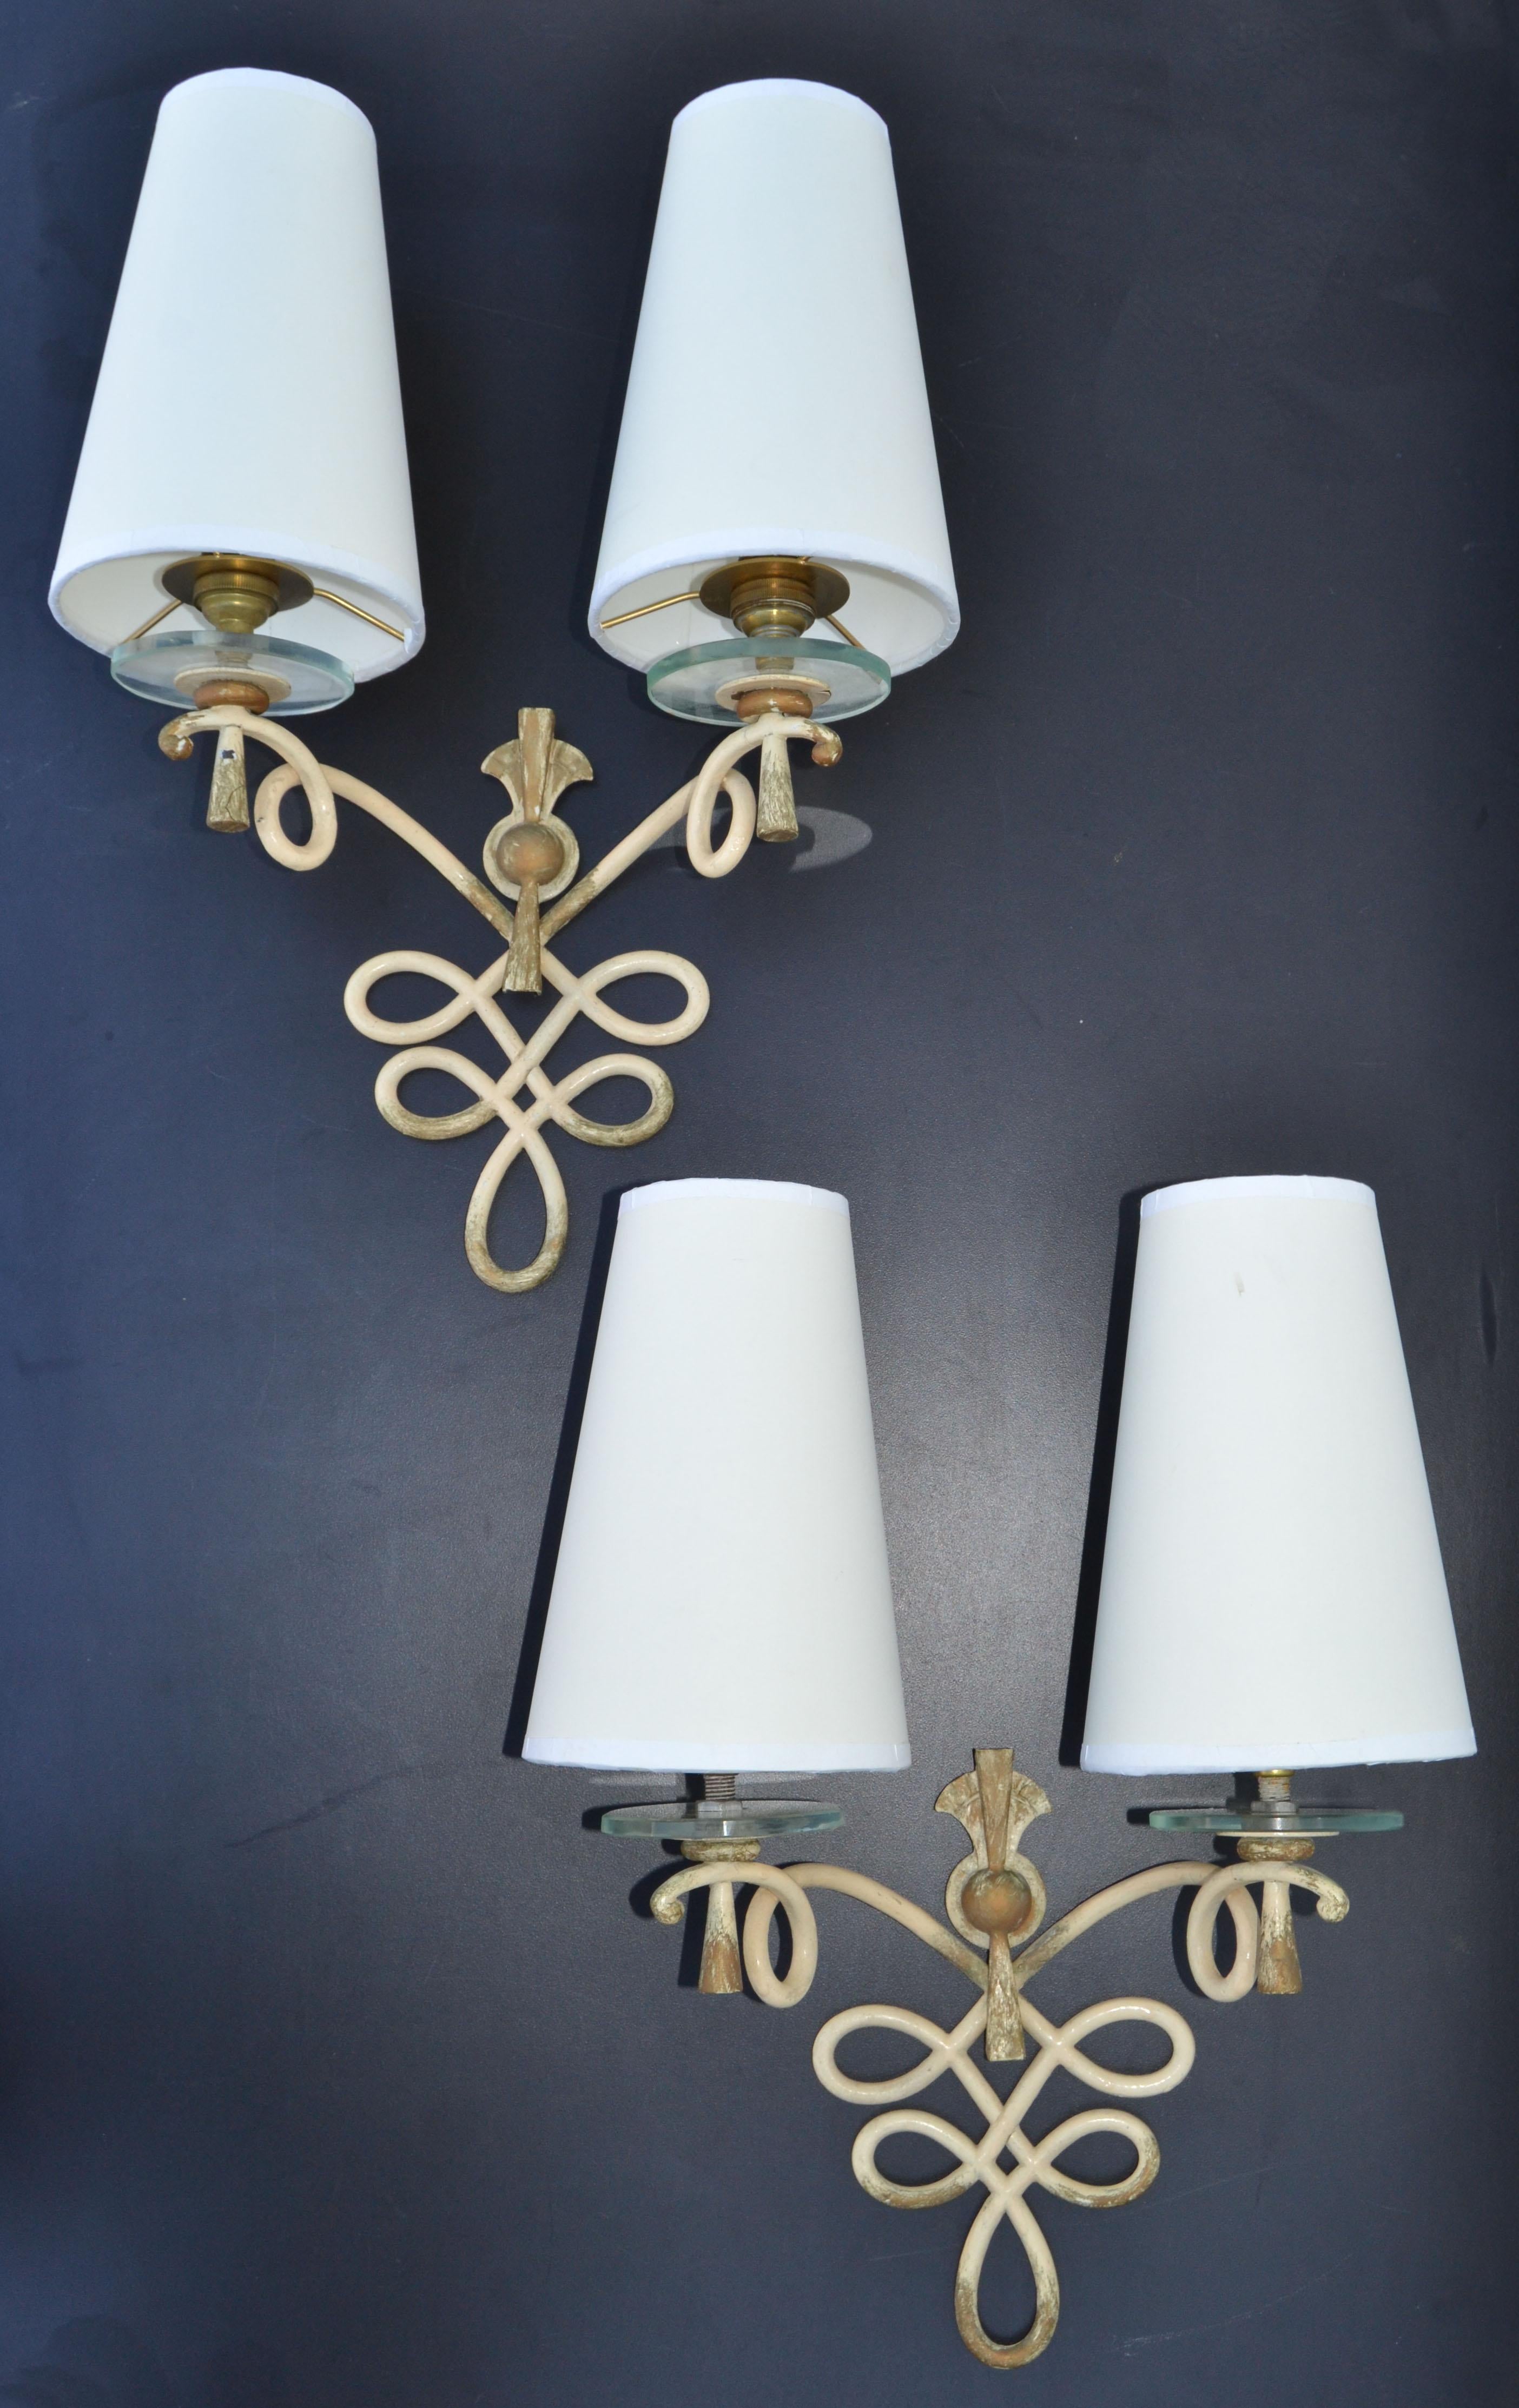 Superb pair of French Art Deco wrought iron with round glass discs sconces, wall lights with beige and gold finish,
They come with custom-made beige paper cone shades.
working condition each sconce takes 2 light bulbs with max. 40 watts, LED work